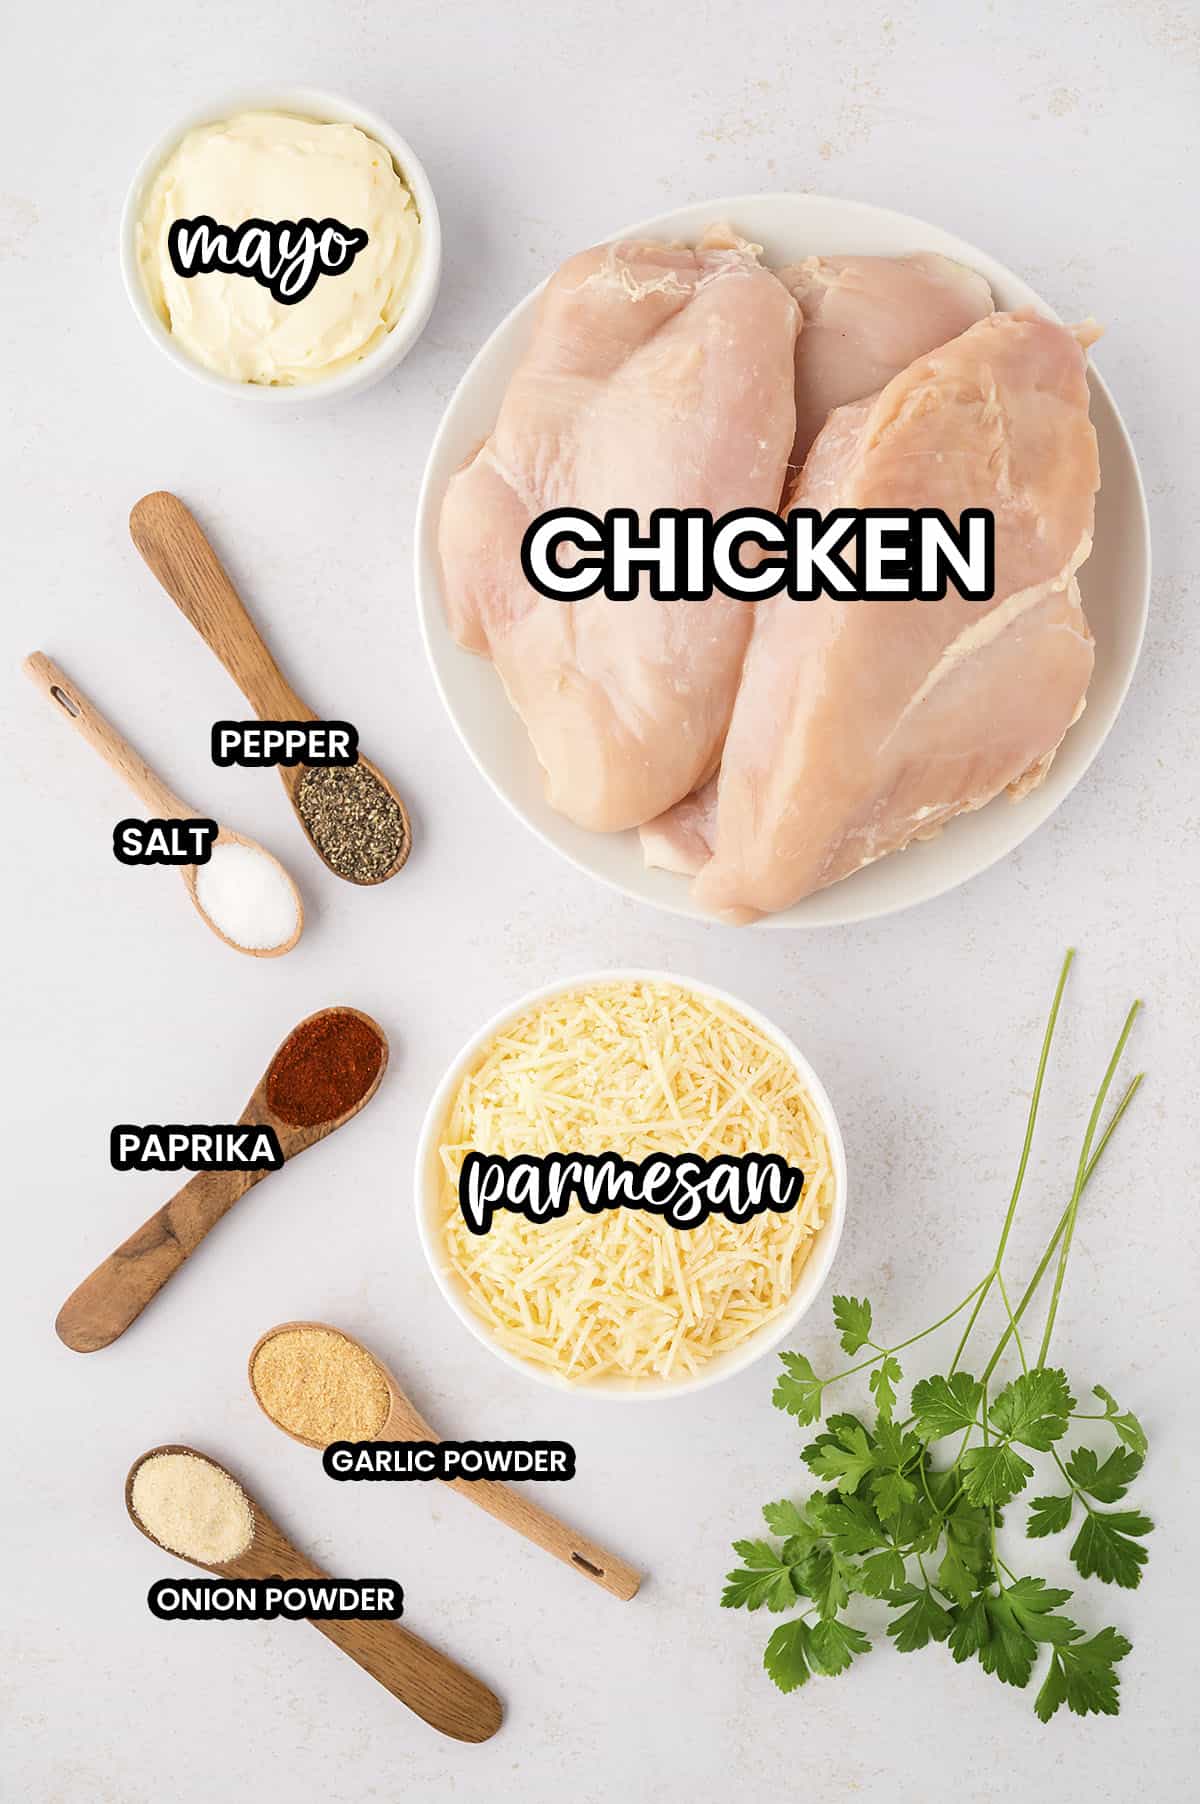 Ingredients for parmesan crusted chicken with mayo.